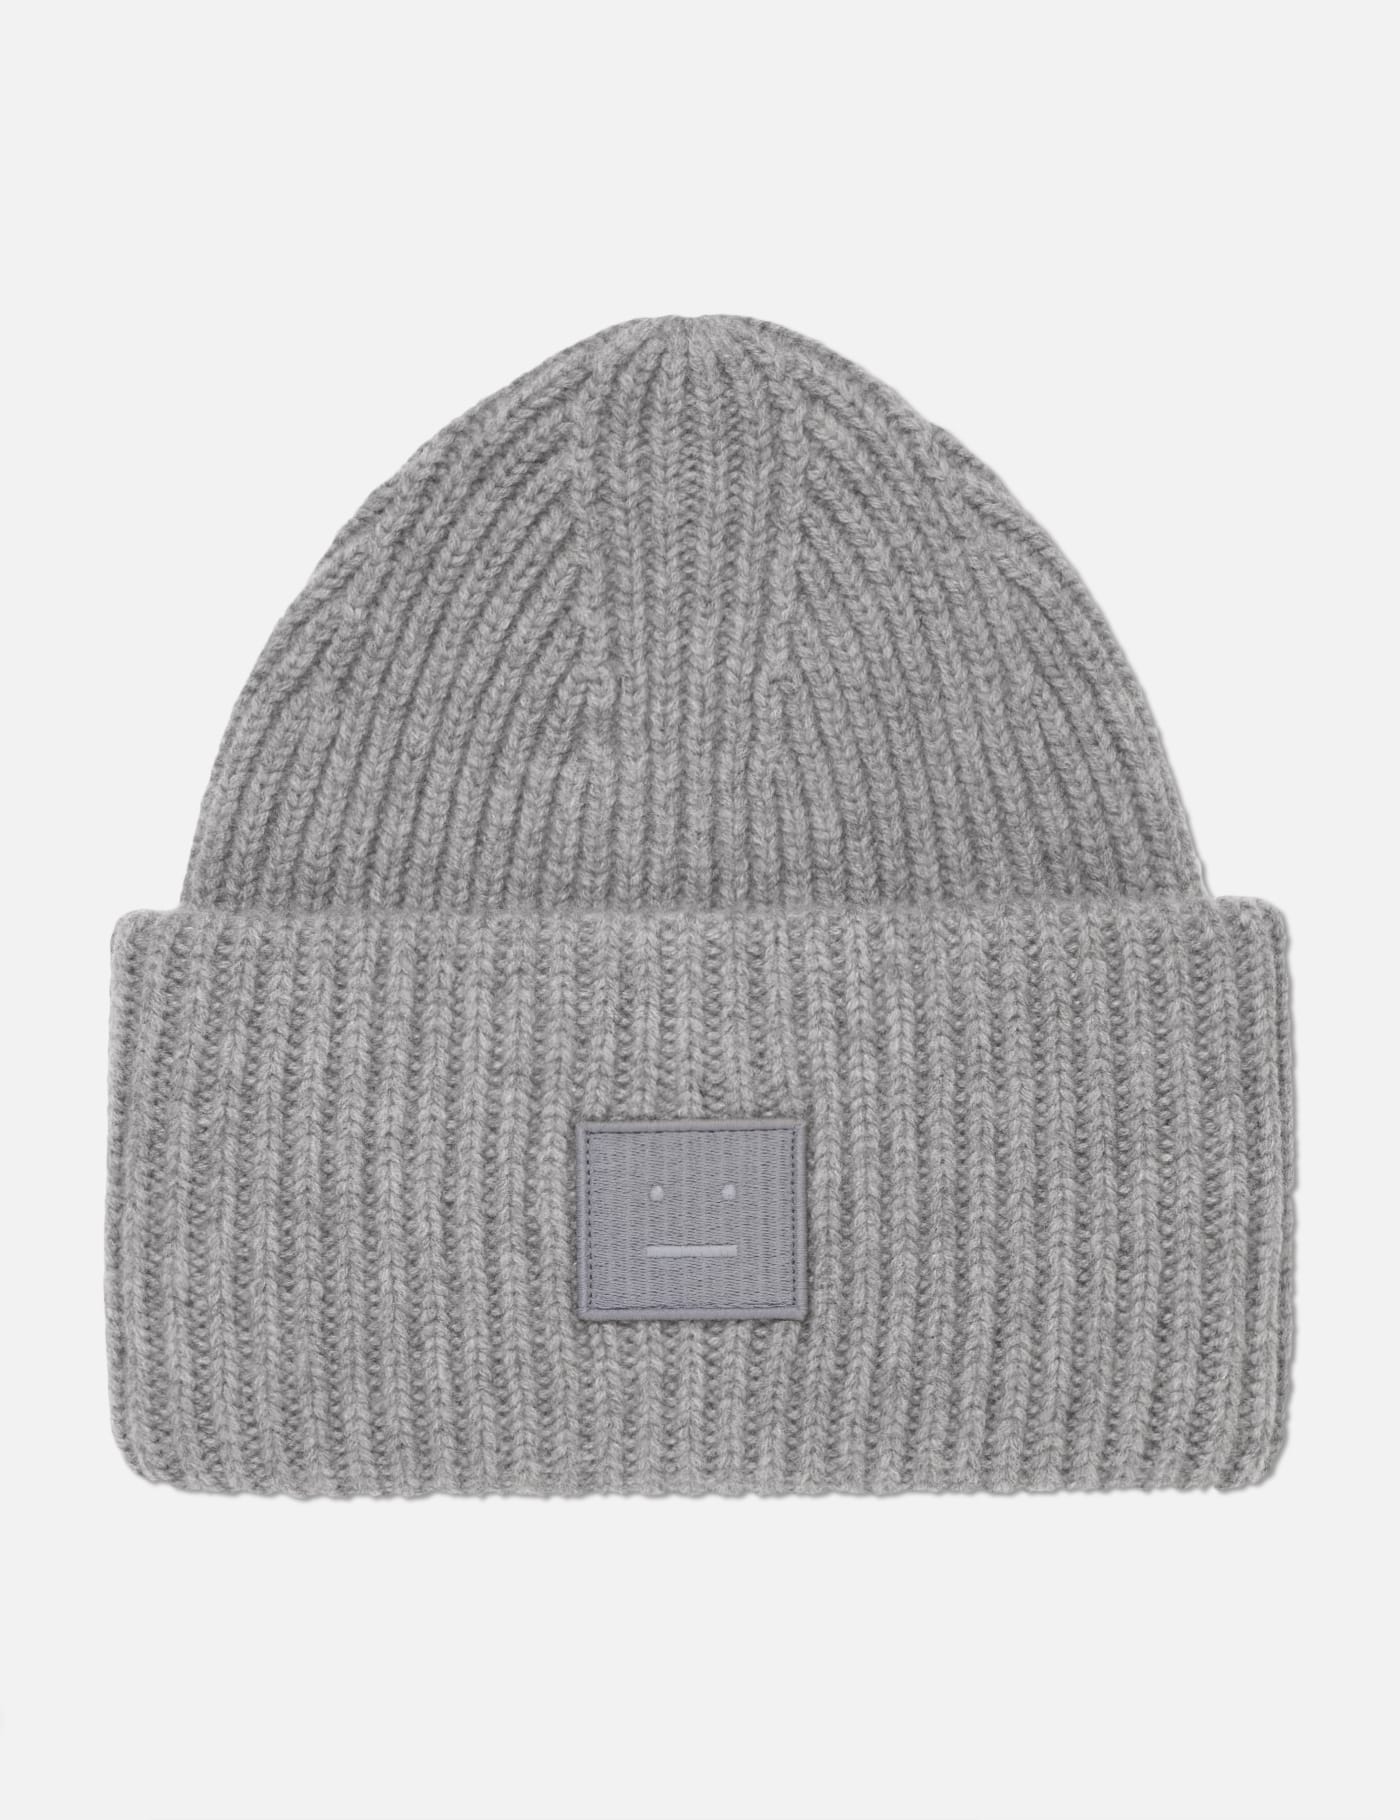 Beanies | HBX - Globally Curated Fashion and Lifestyle by Hypebeast